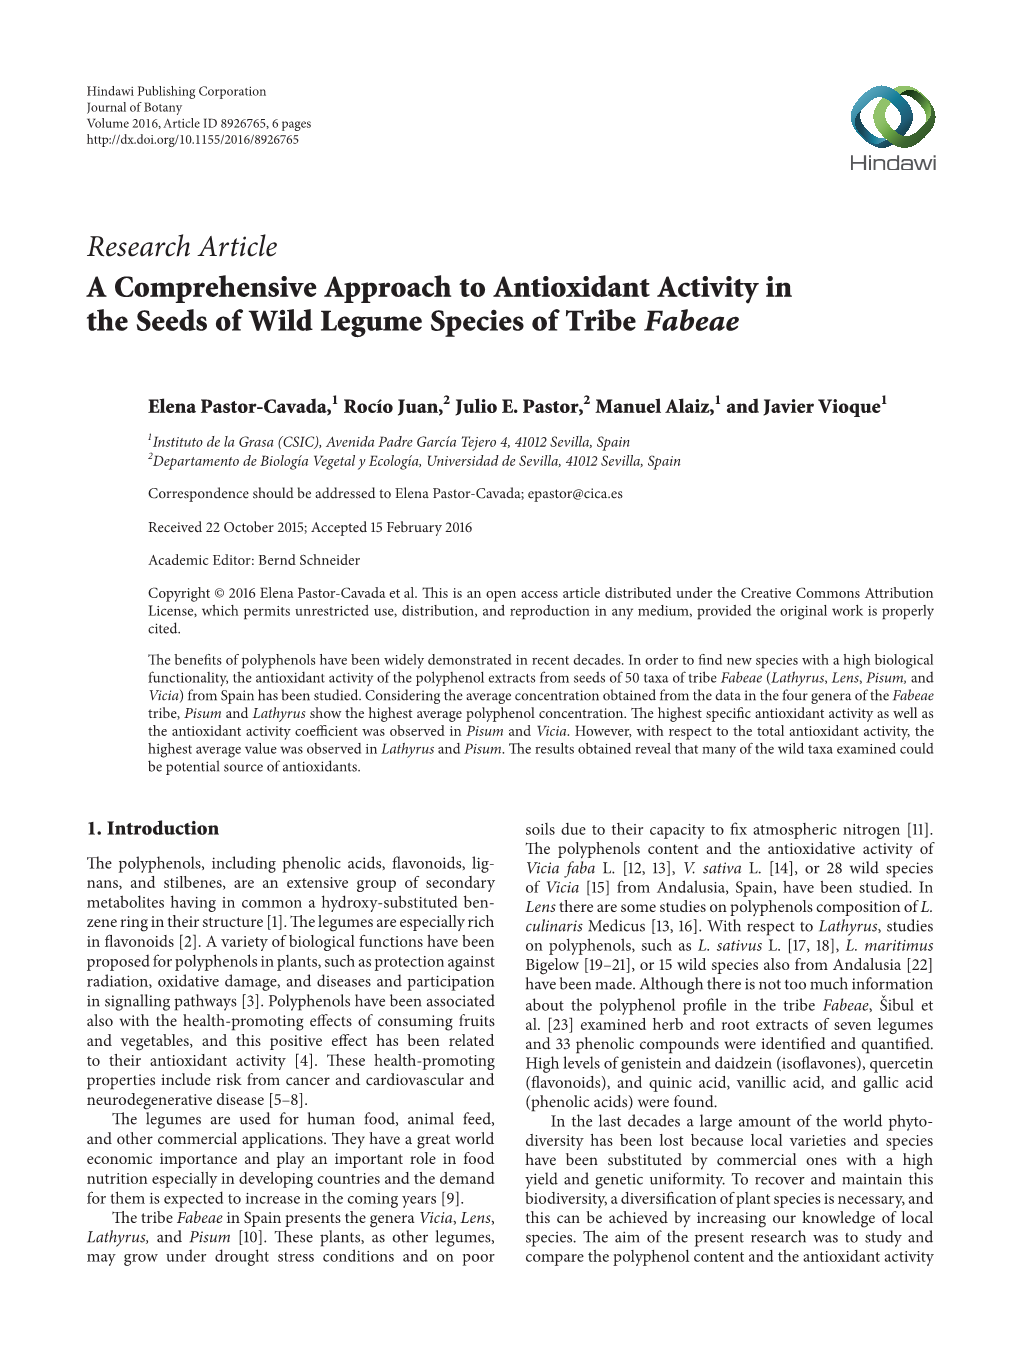 Research Article a Comprehensive Approach to Antioxidant Activity in the Seeds of Wild Legume Species of Tribe Fabeae